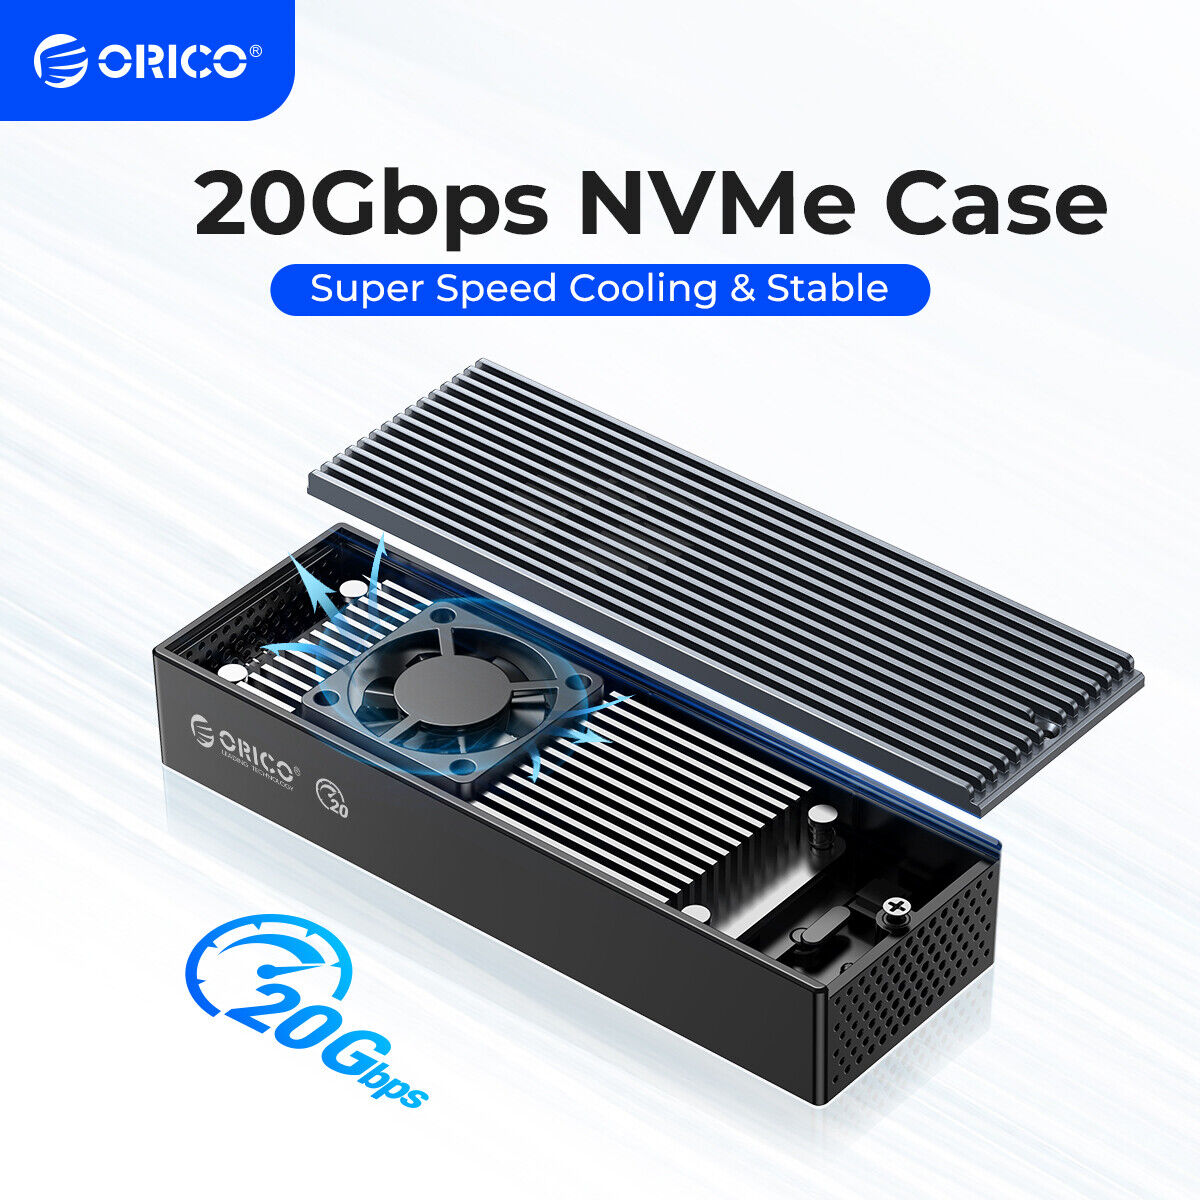 ORICO 20Gbps M.2 NVMe/NGFF SATA SSD Enclosure USB 3.1 Gen 2 10Gbps to NVMe PCI-E